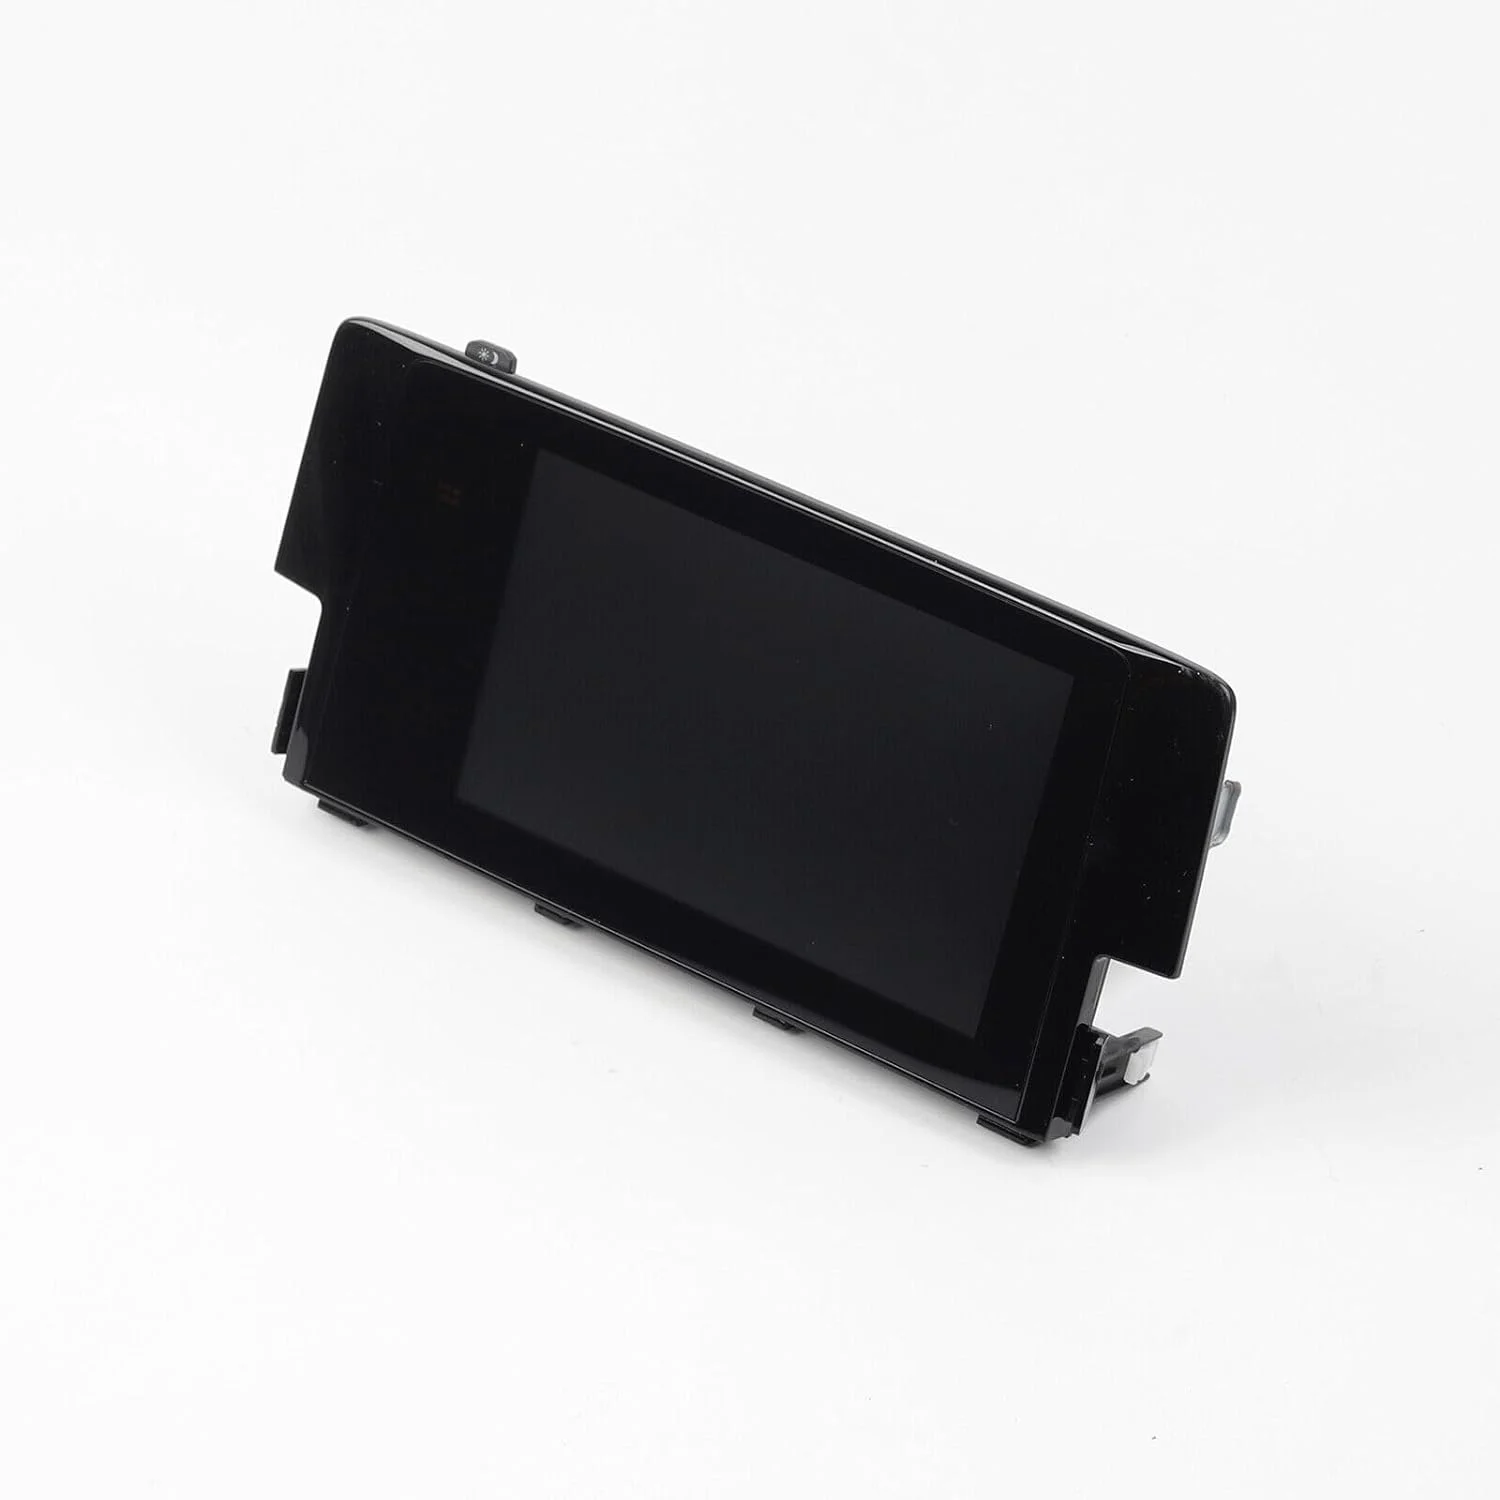 

Suitable for 18 Honda Civic models with capacitive touch assembly 39710-TBA-A11 car navigation assembly